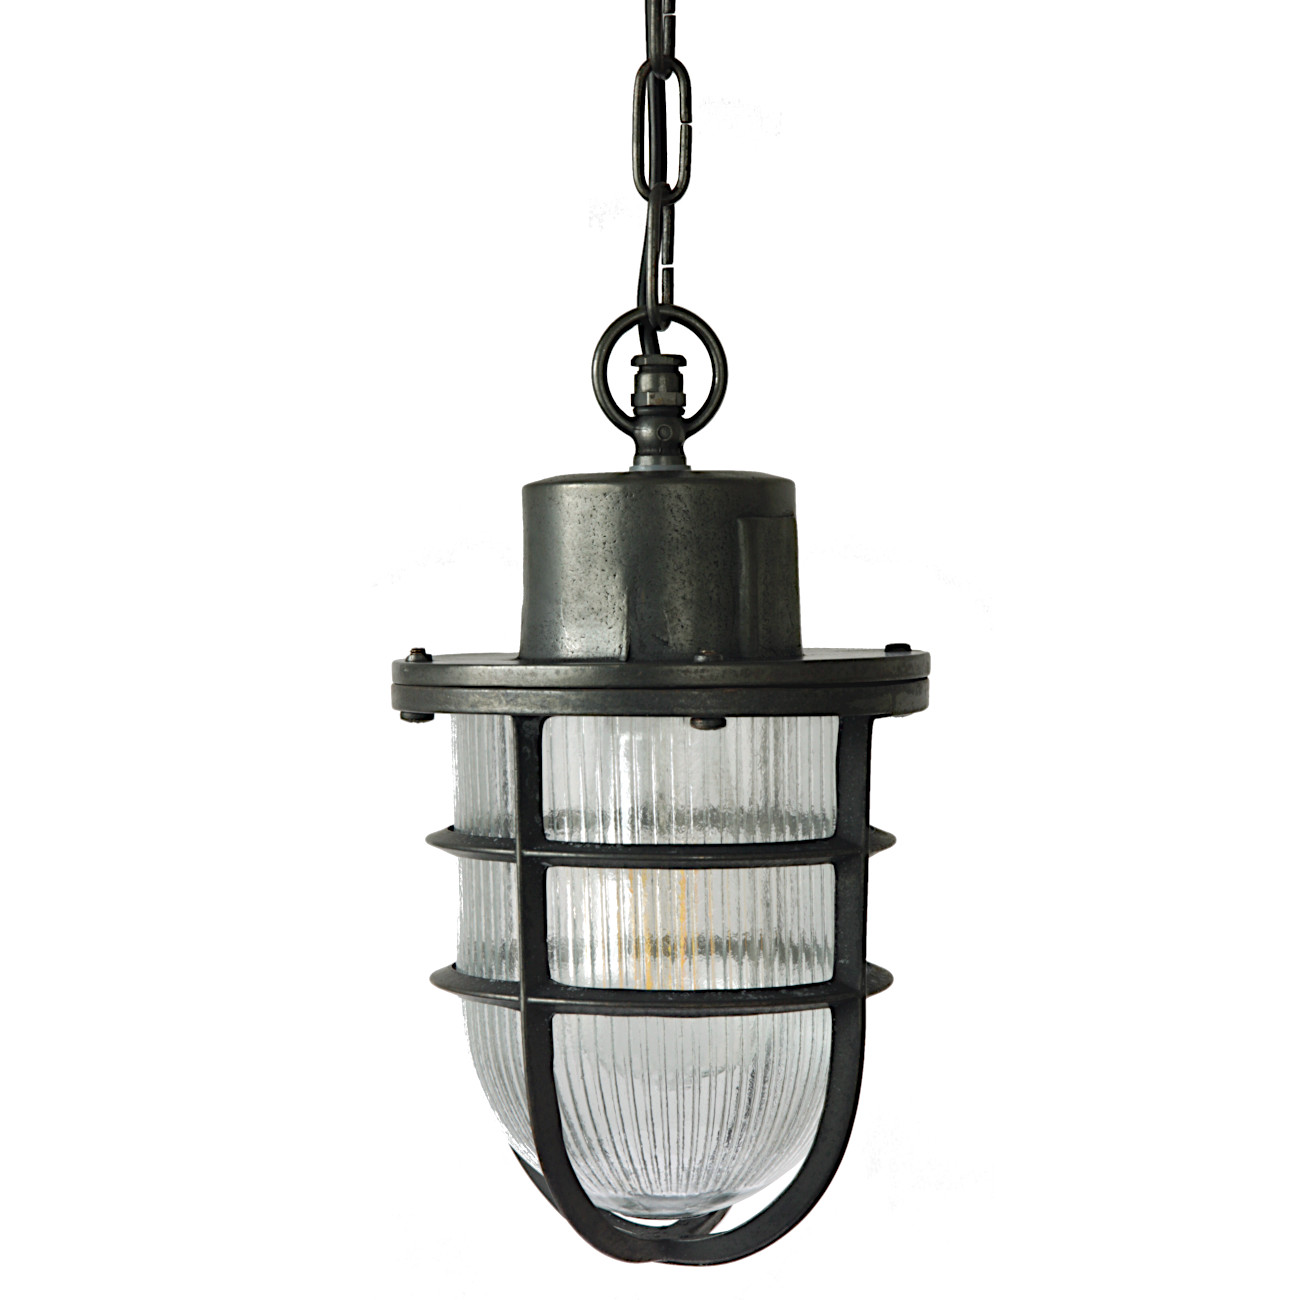 Pendant brass light N° 19 with holophane glass